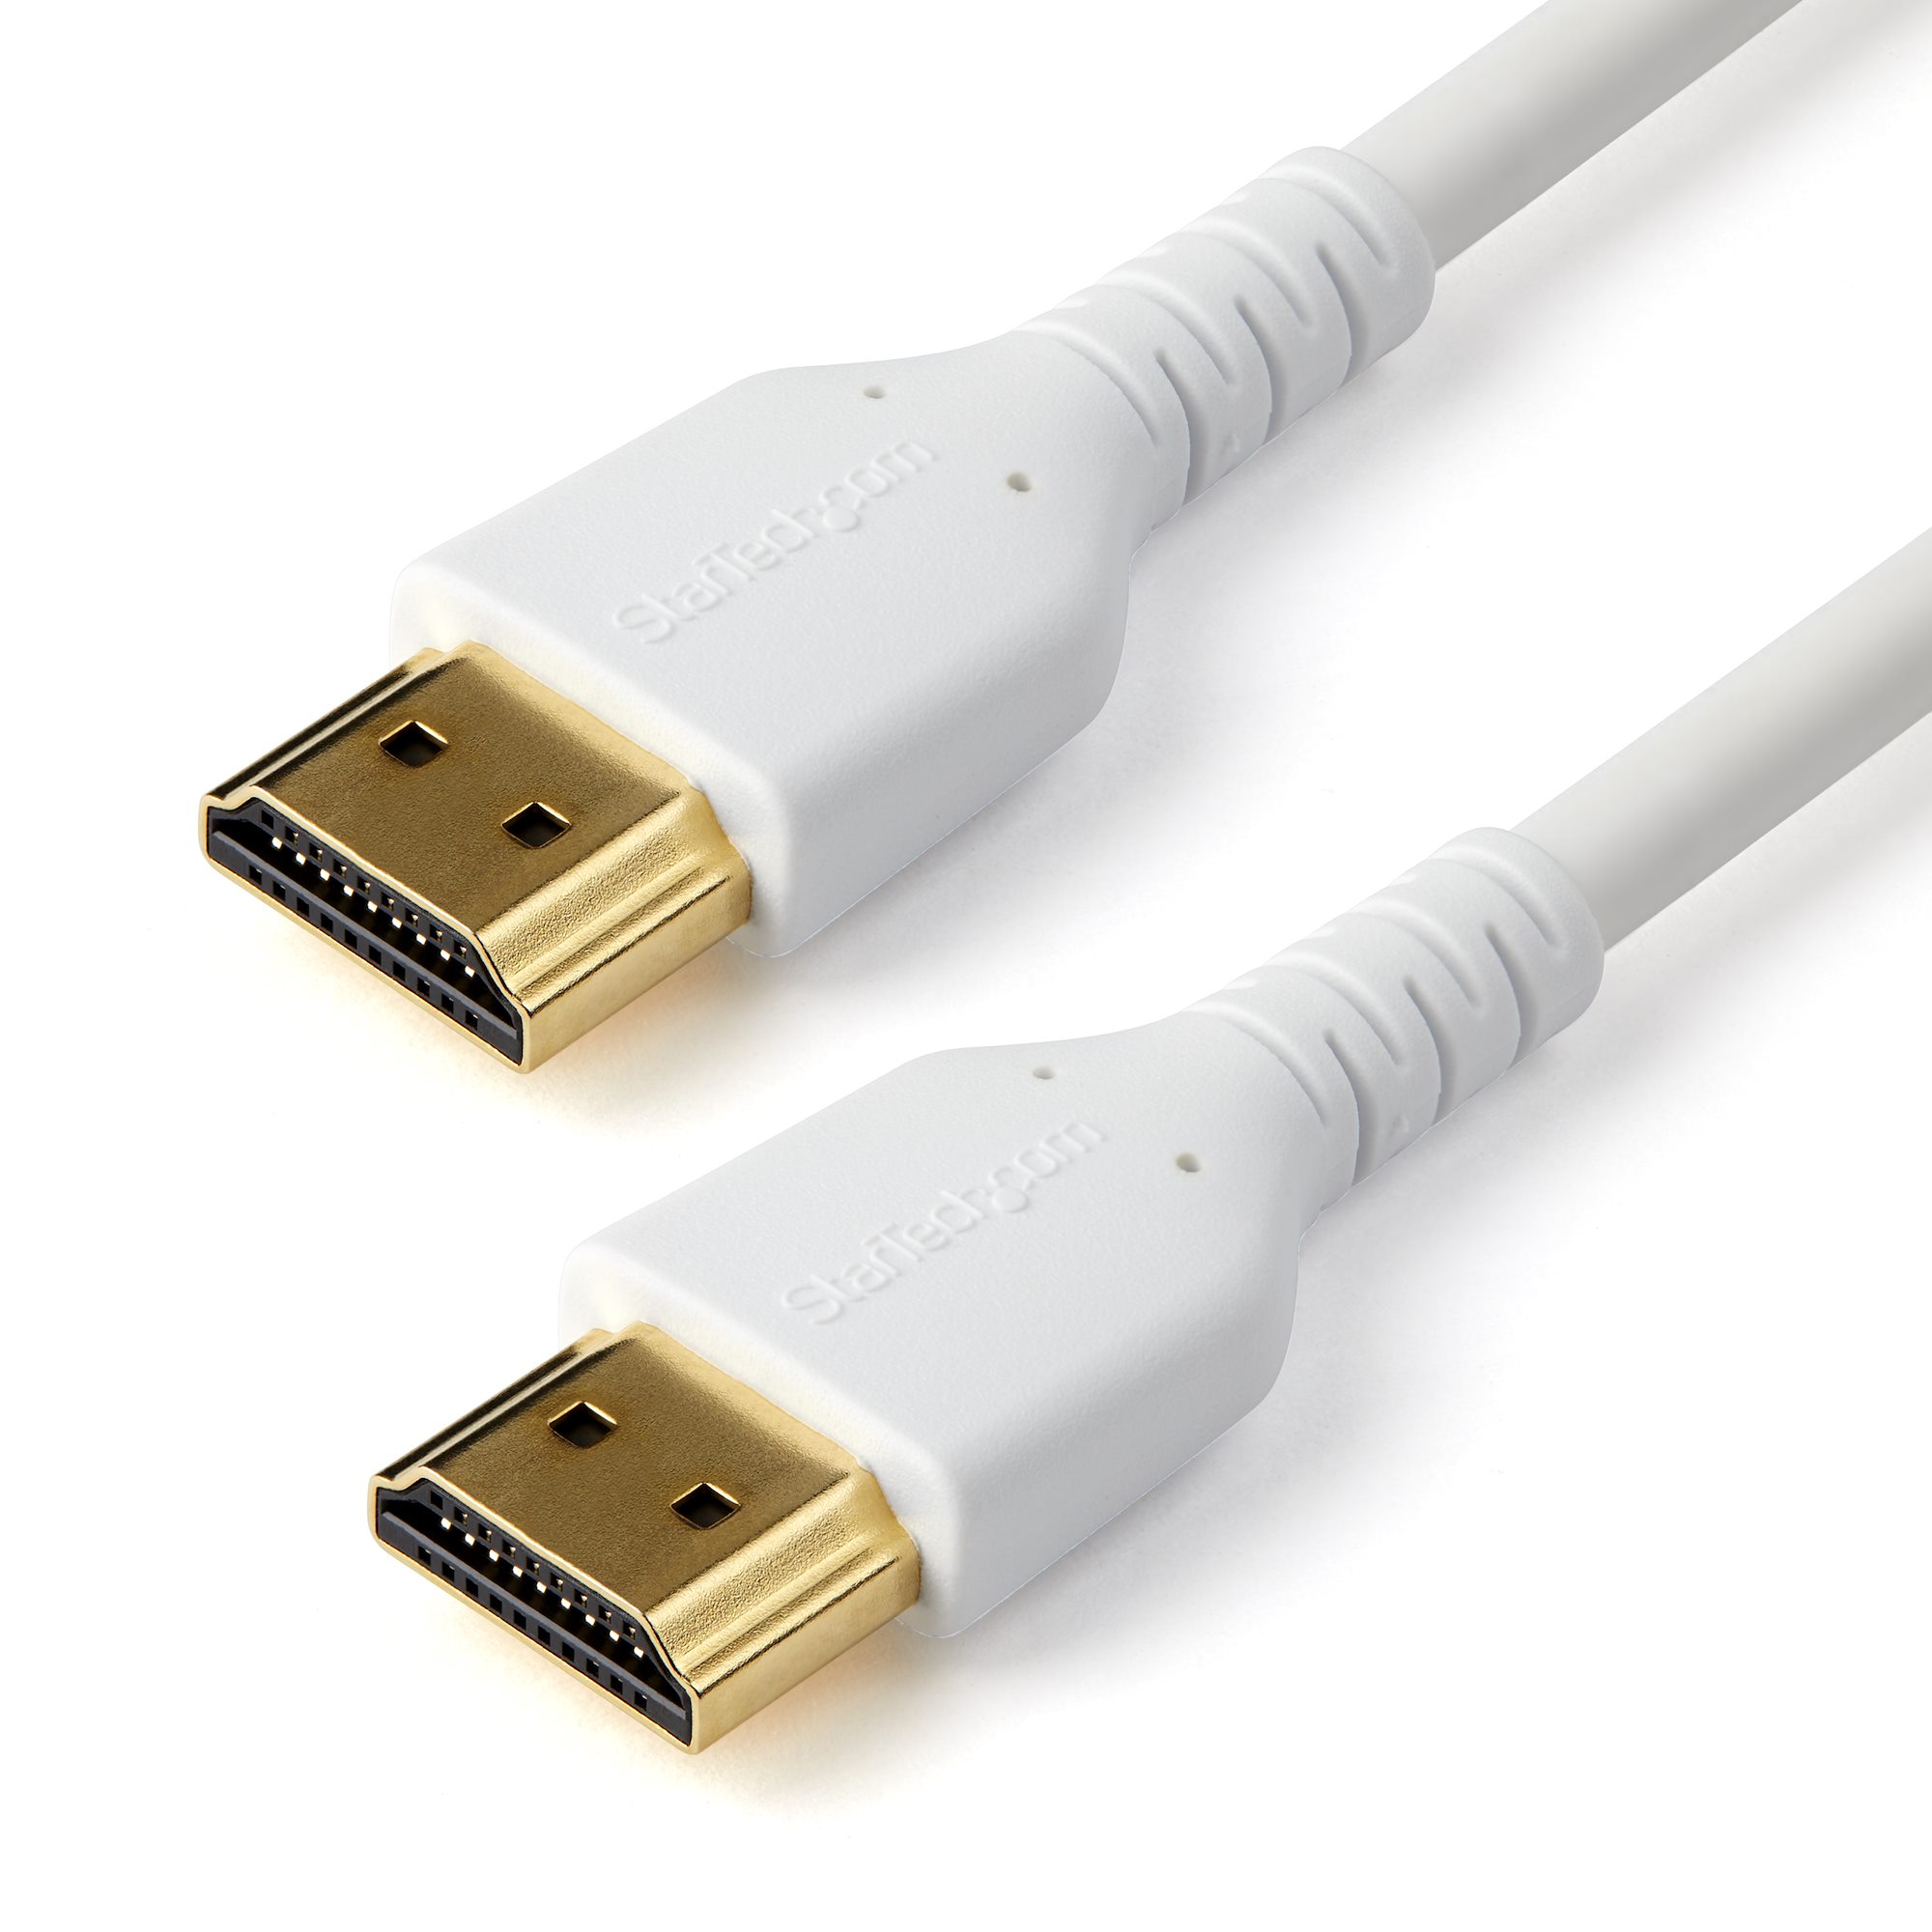 6.6ft (2m) High Speed HDMI® to Mini HDMI Cable with Ethernet - 4K 60Hz, HDMI  Mini Cables and Micro Cables, HDMI